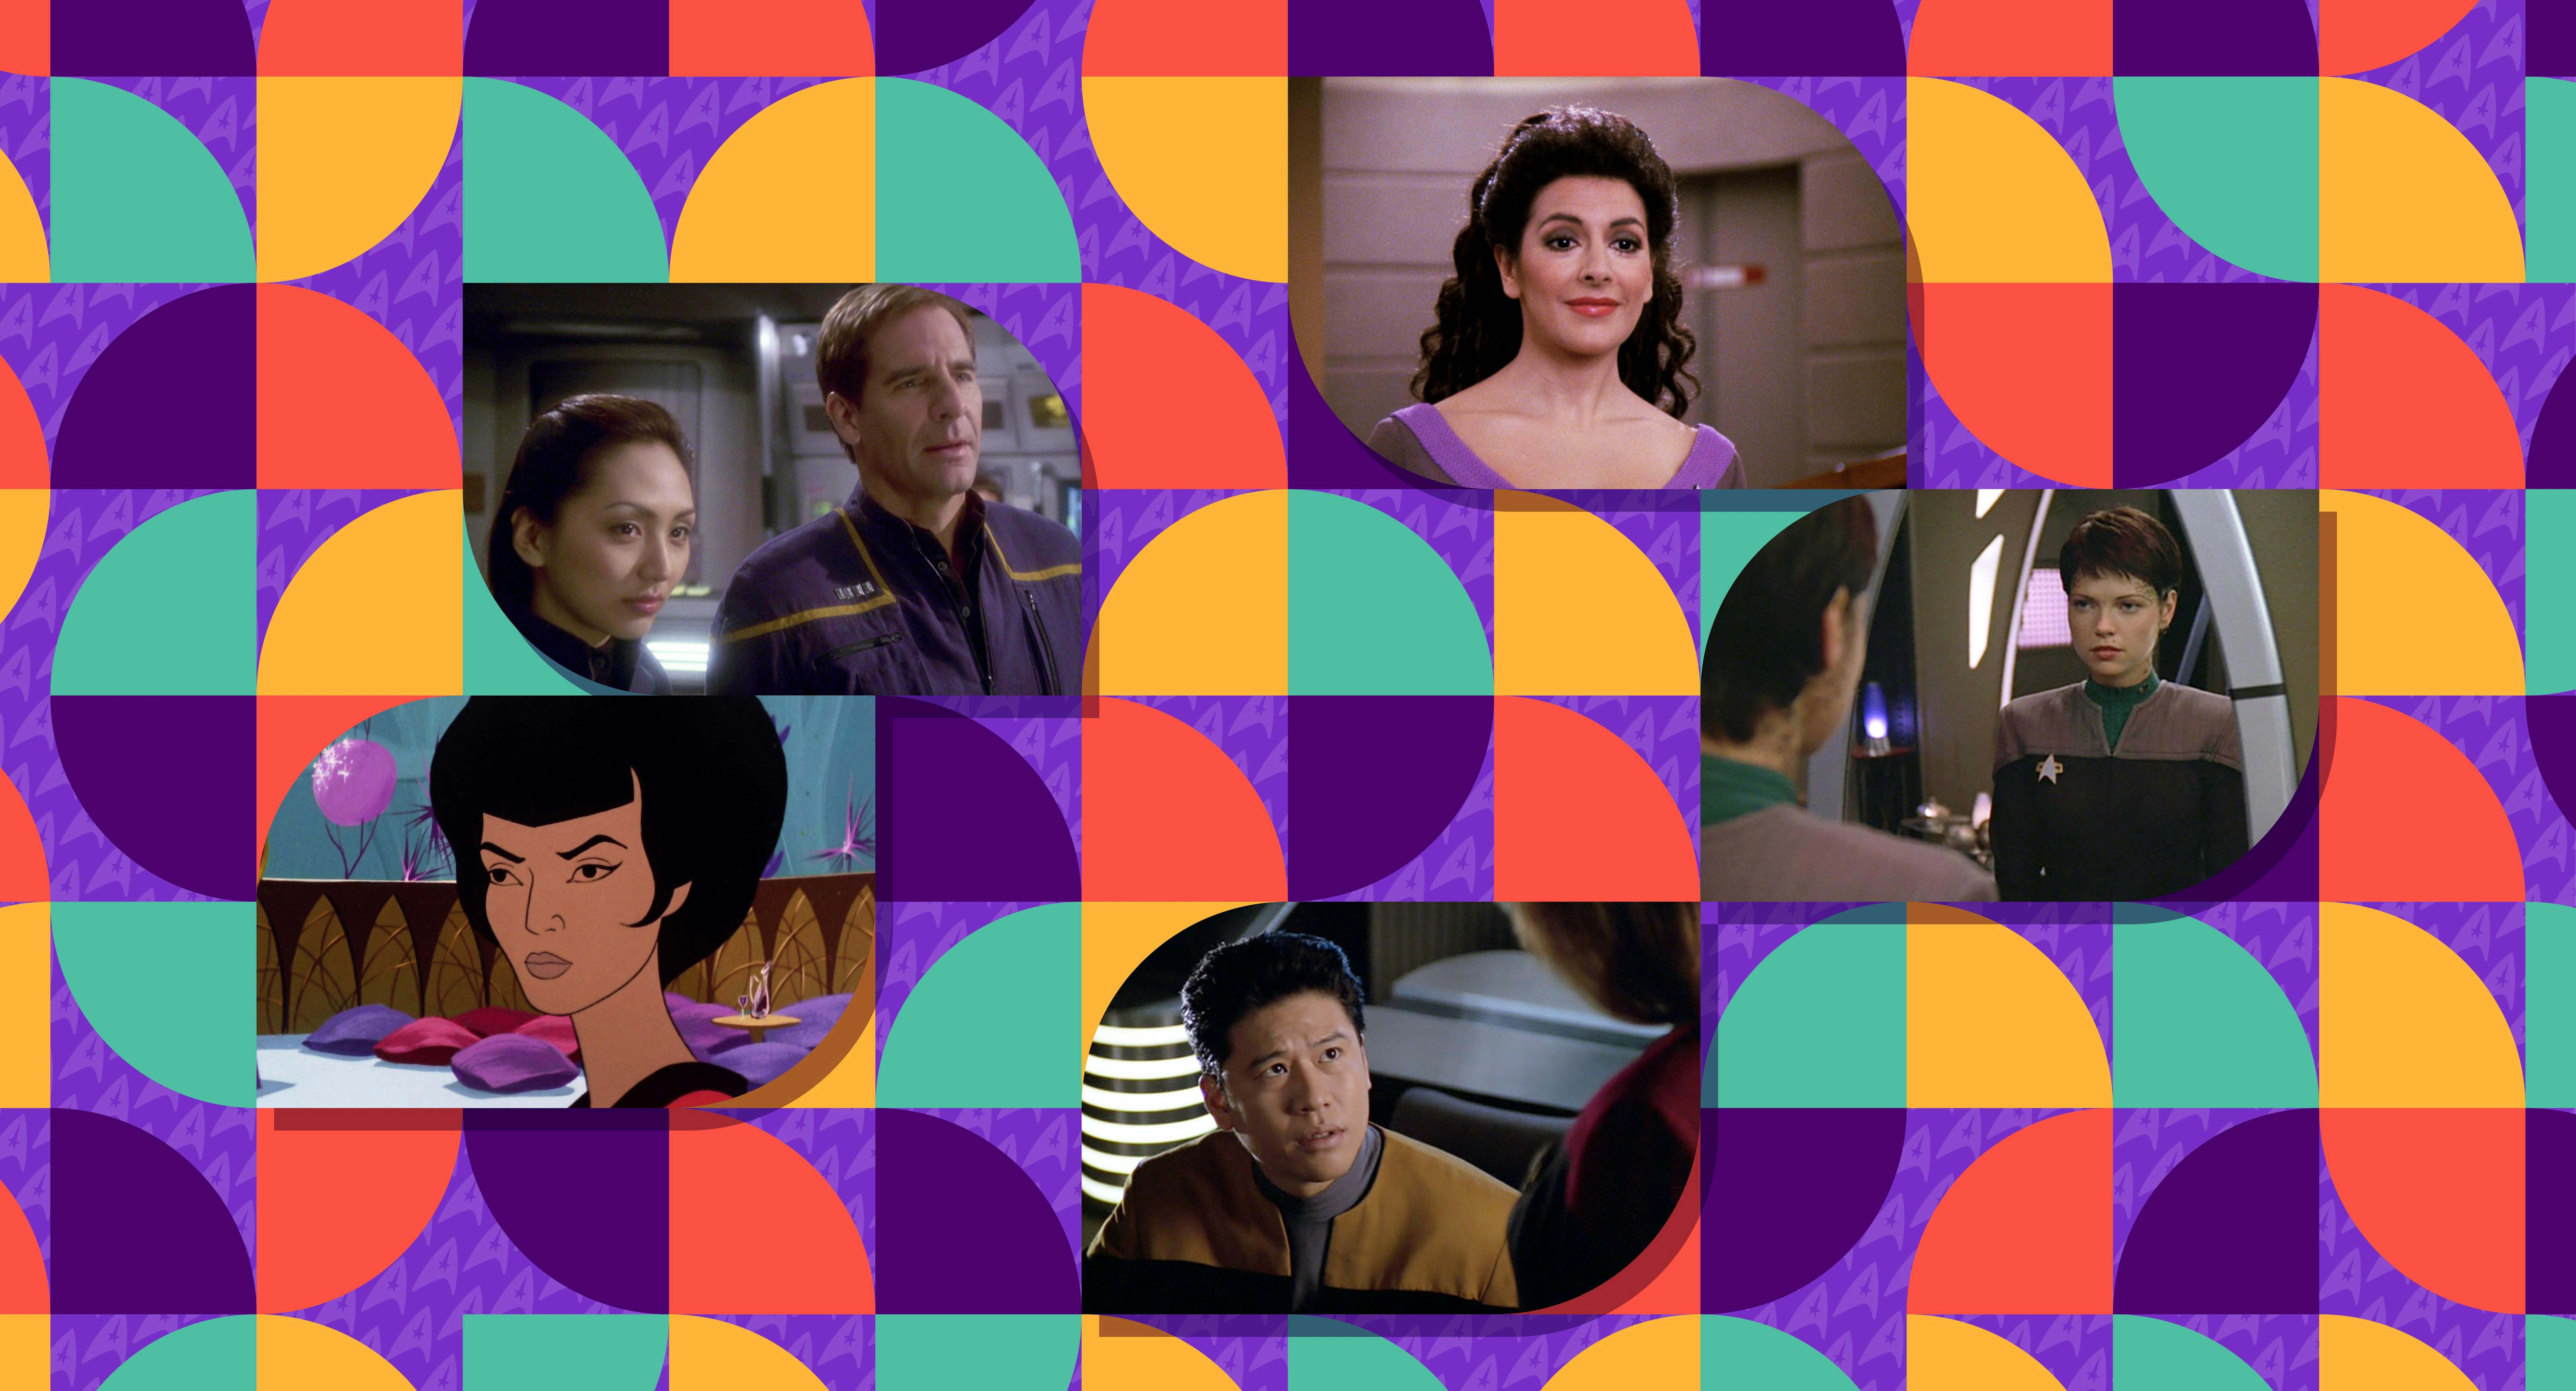 A collage of images from Star Trek shows set against a background of circular designs.